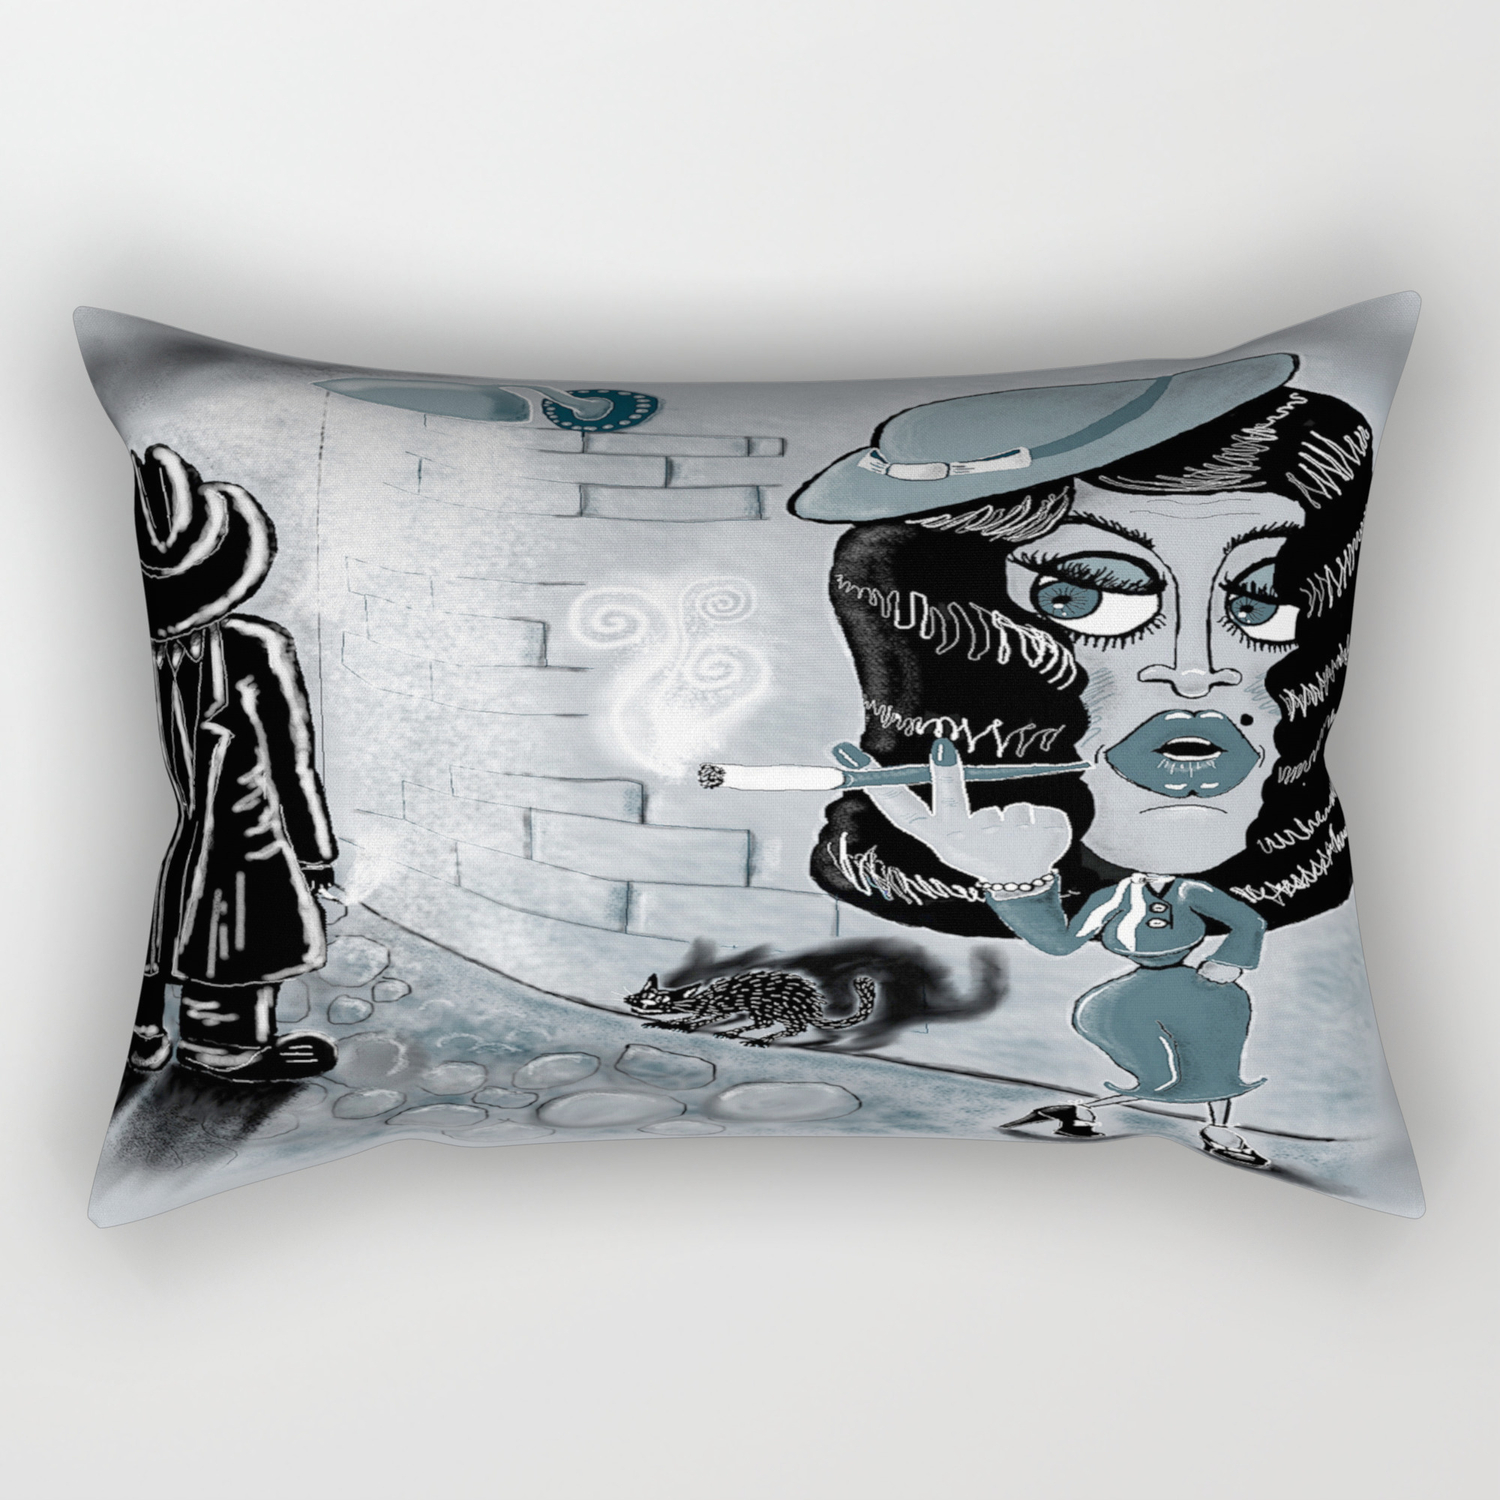 Femme Fatale and the Unknown Man, film Rectangular Pillow by Amy |